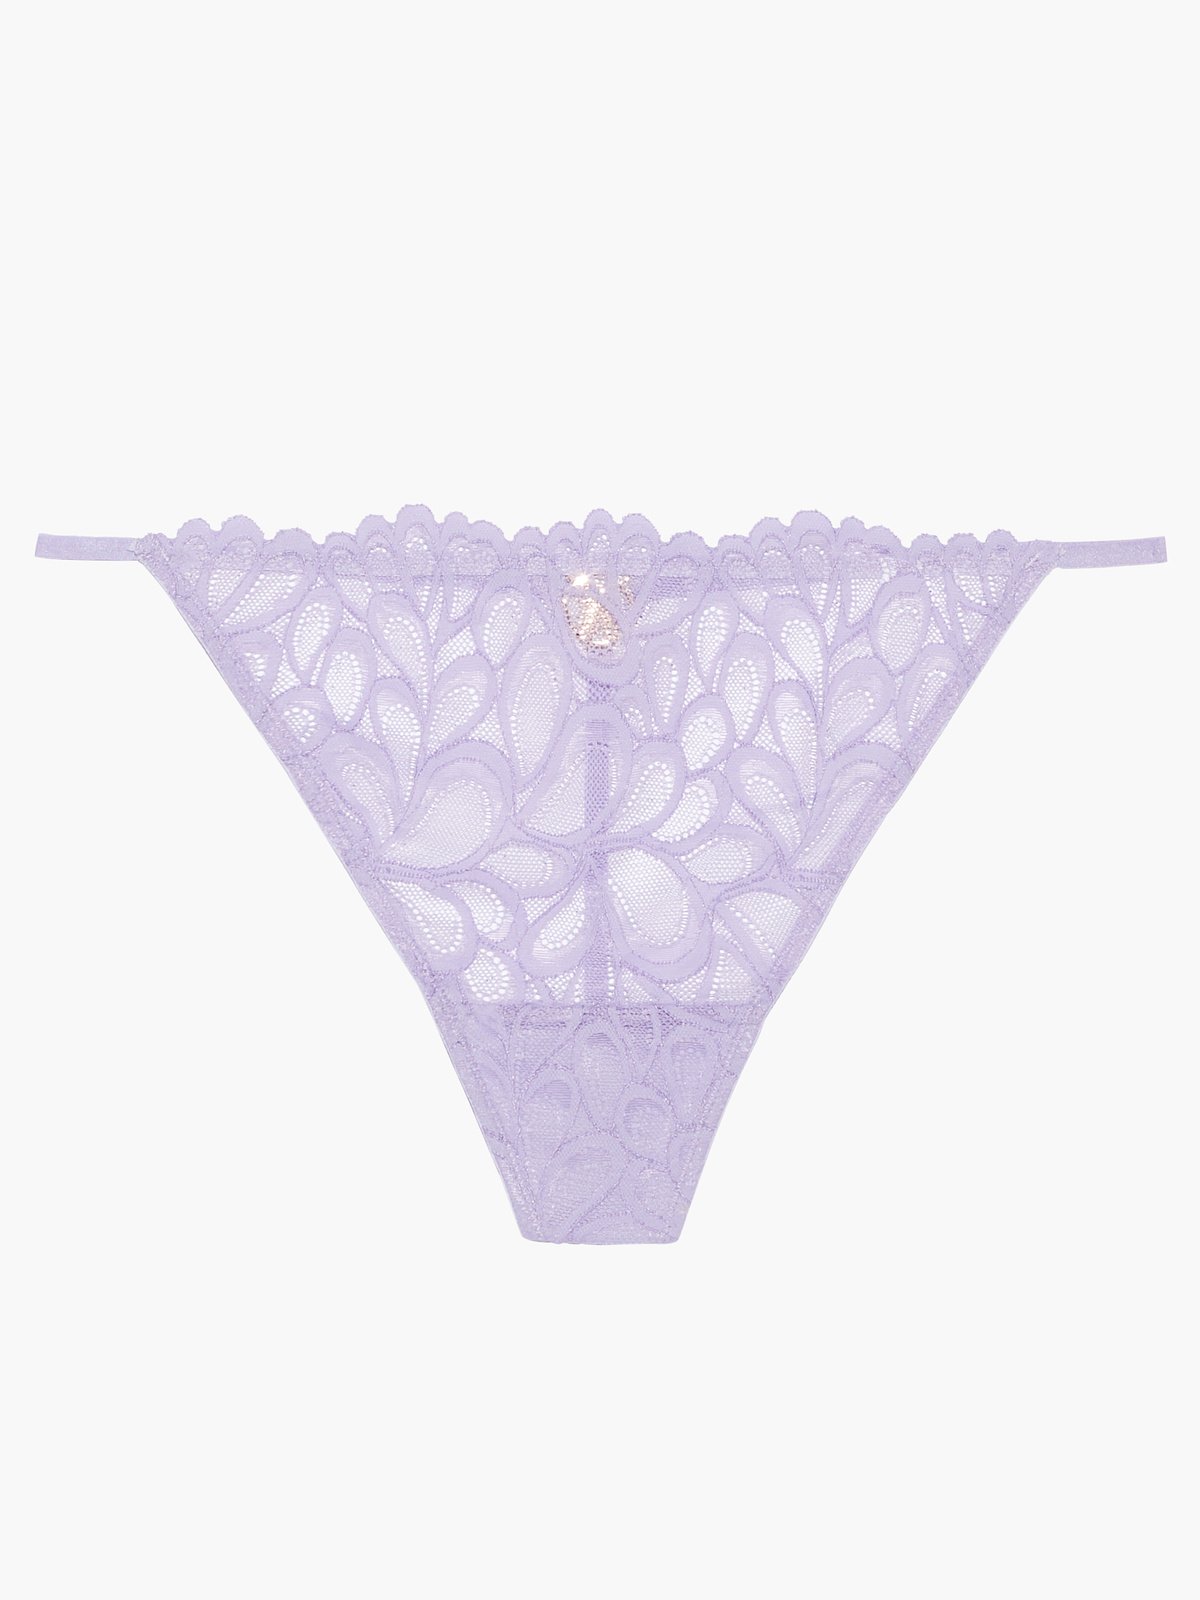 Crotchless Thong Panties in Lavender Purple Stretch Lace -  Canada